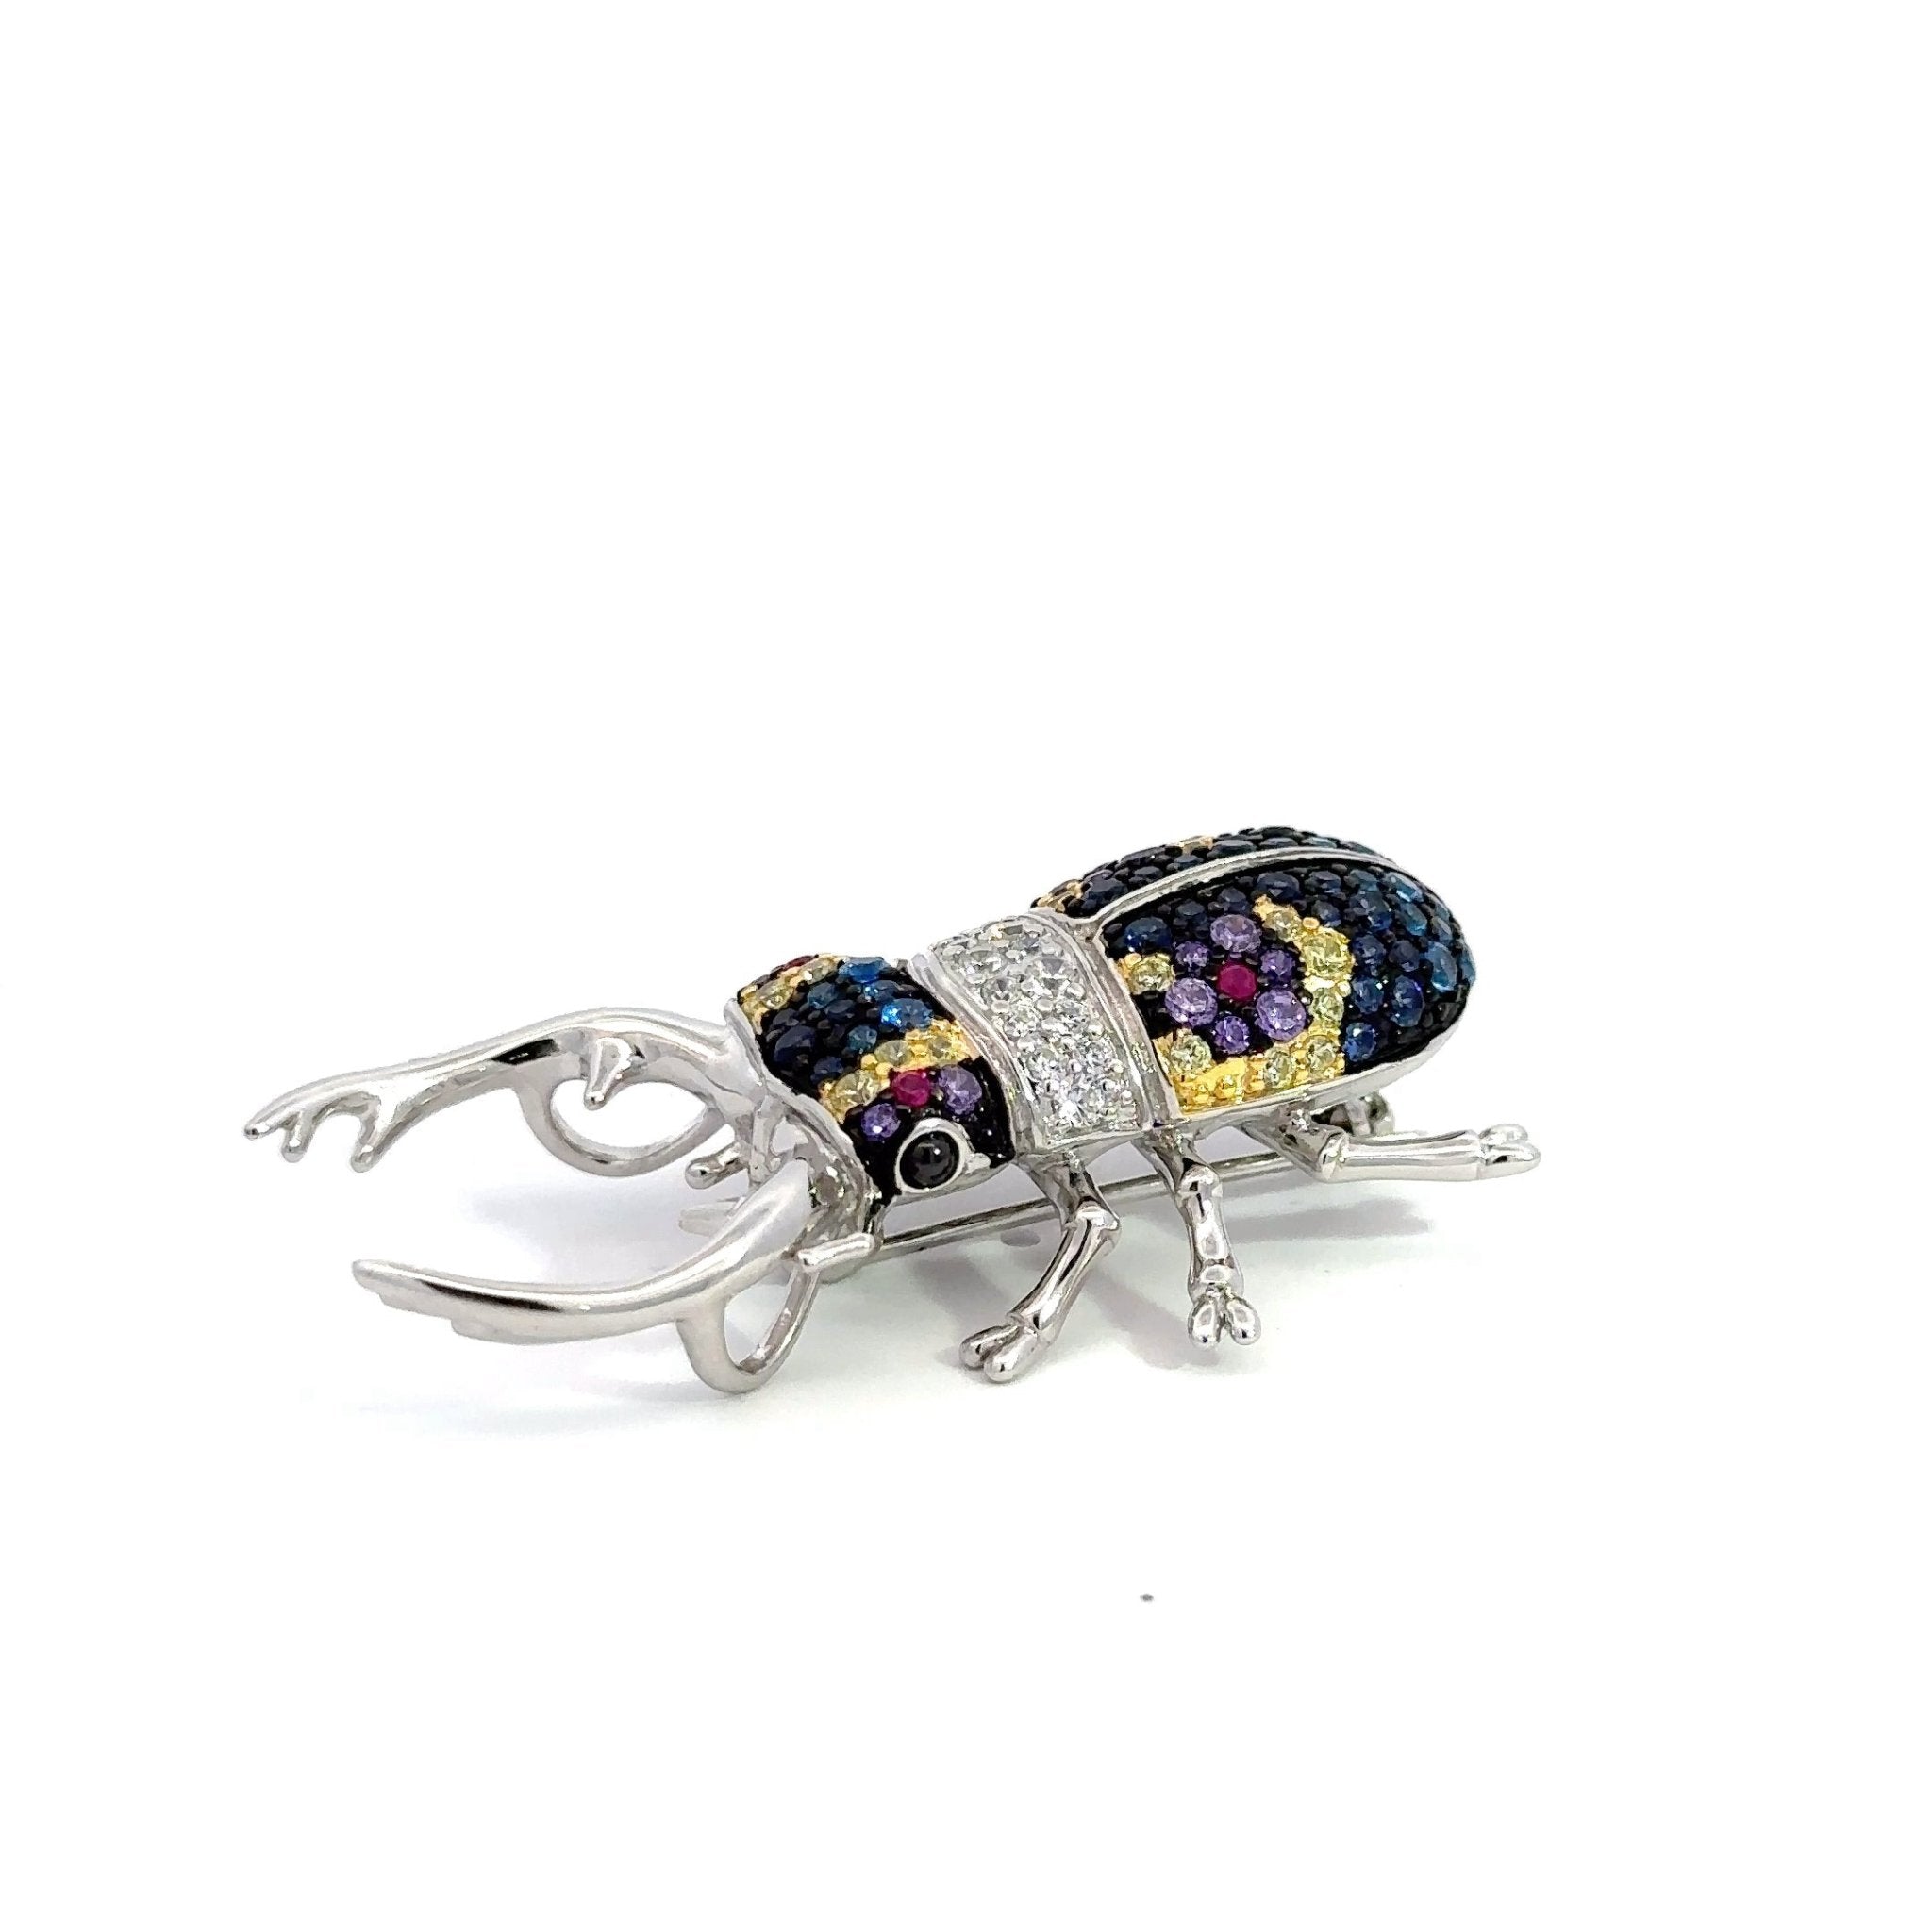 Multicolor Stag Beetle Silver Brooch by Natkina